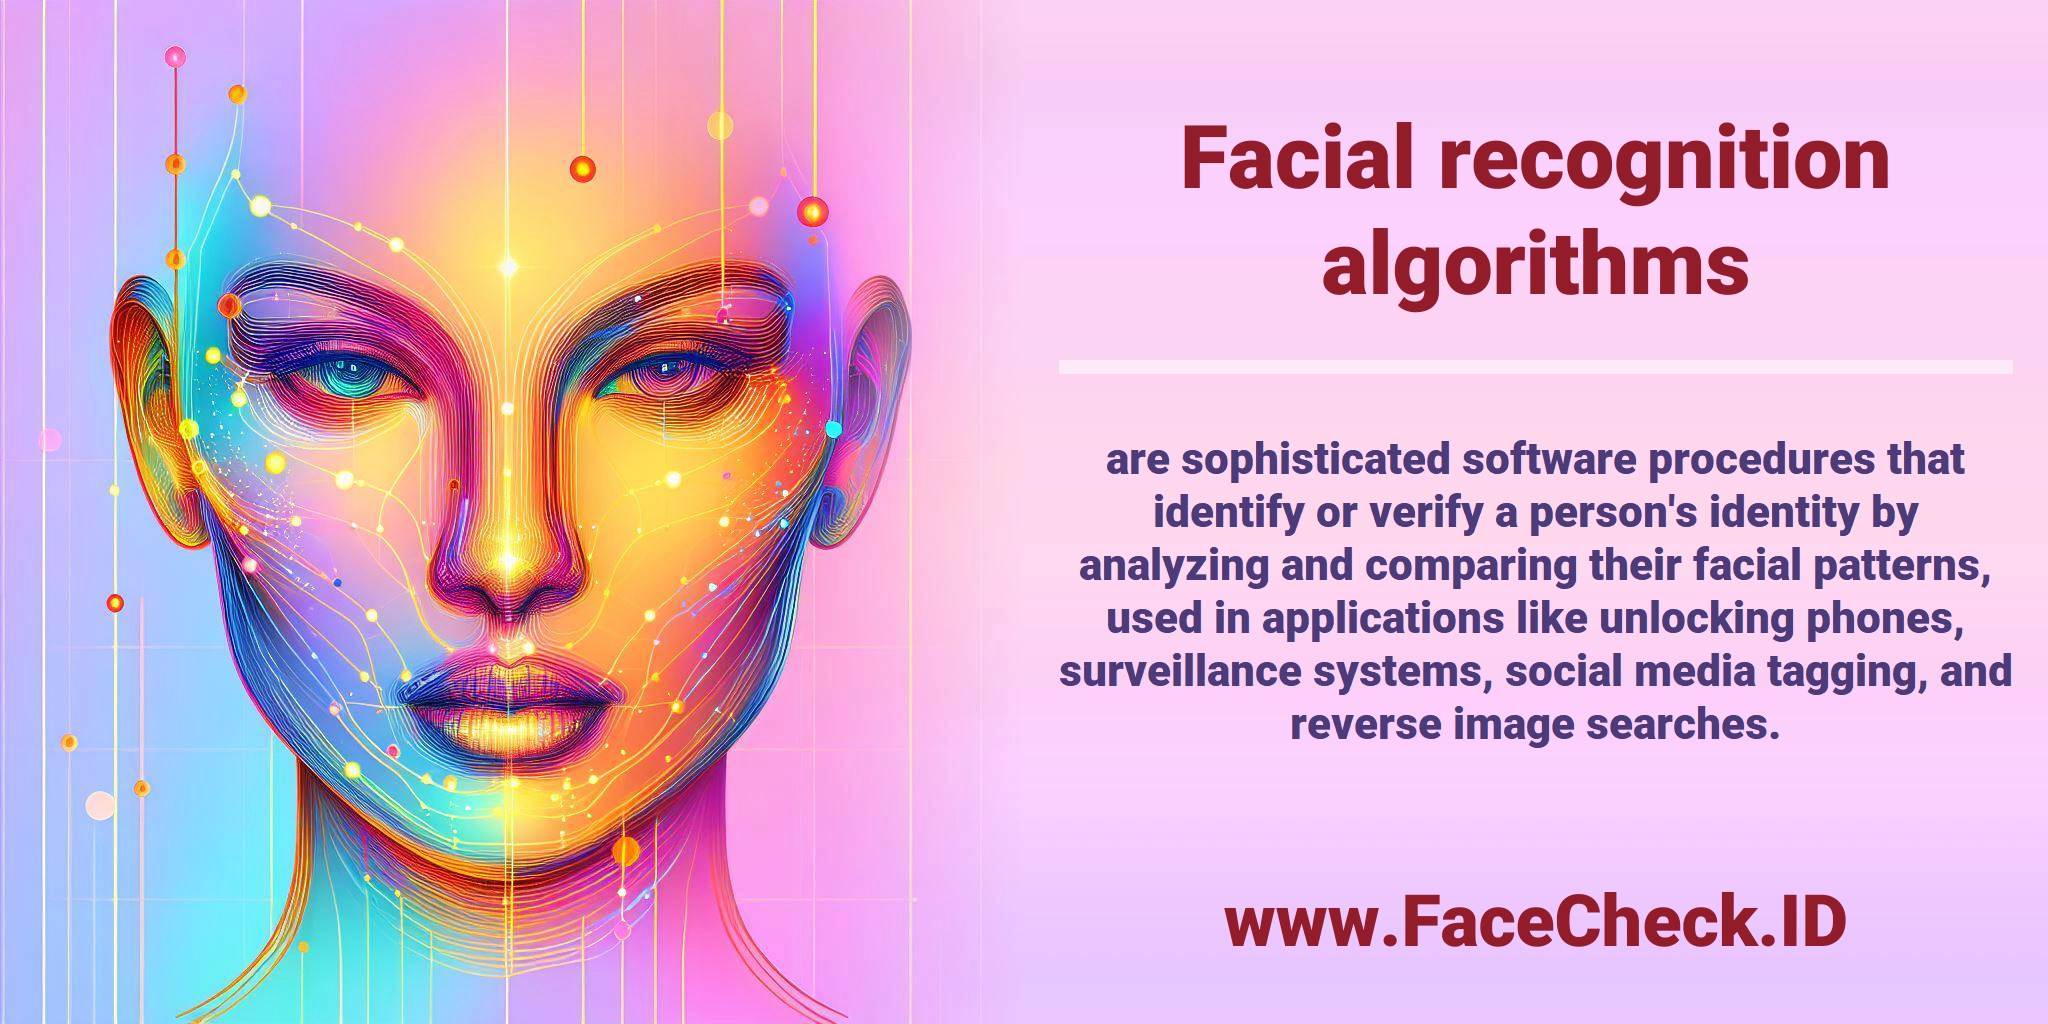 <b>Facial recognition algorithms</b> are sophisticated software procedures that identify or verify a person's identity by analyzing and comparing their facial patterns, used in applications like unlocking phones, surveillance systems, social media tagging, and reverse image searches.